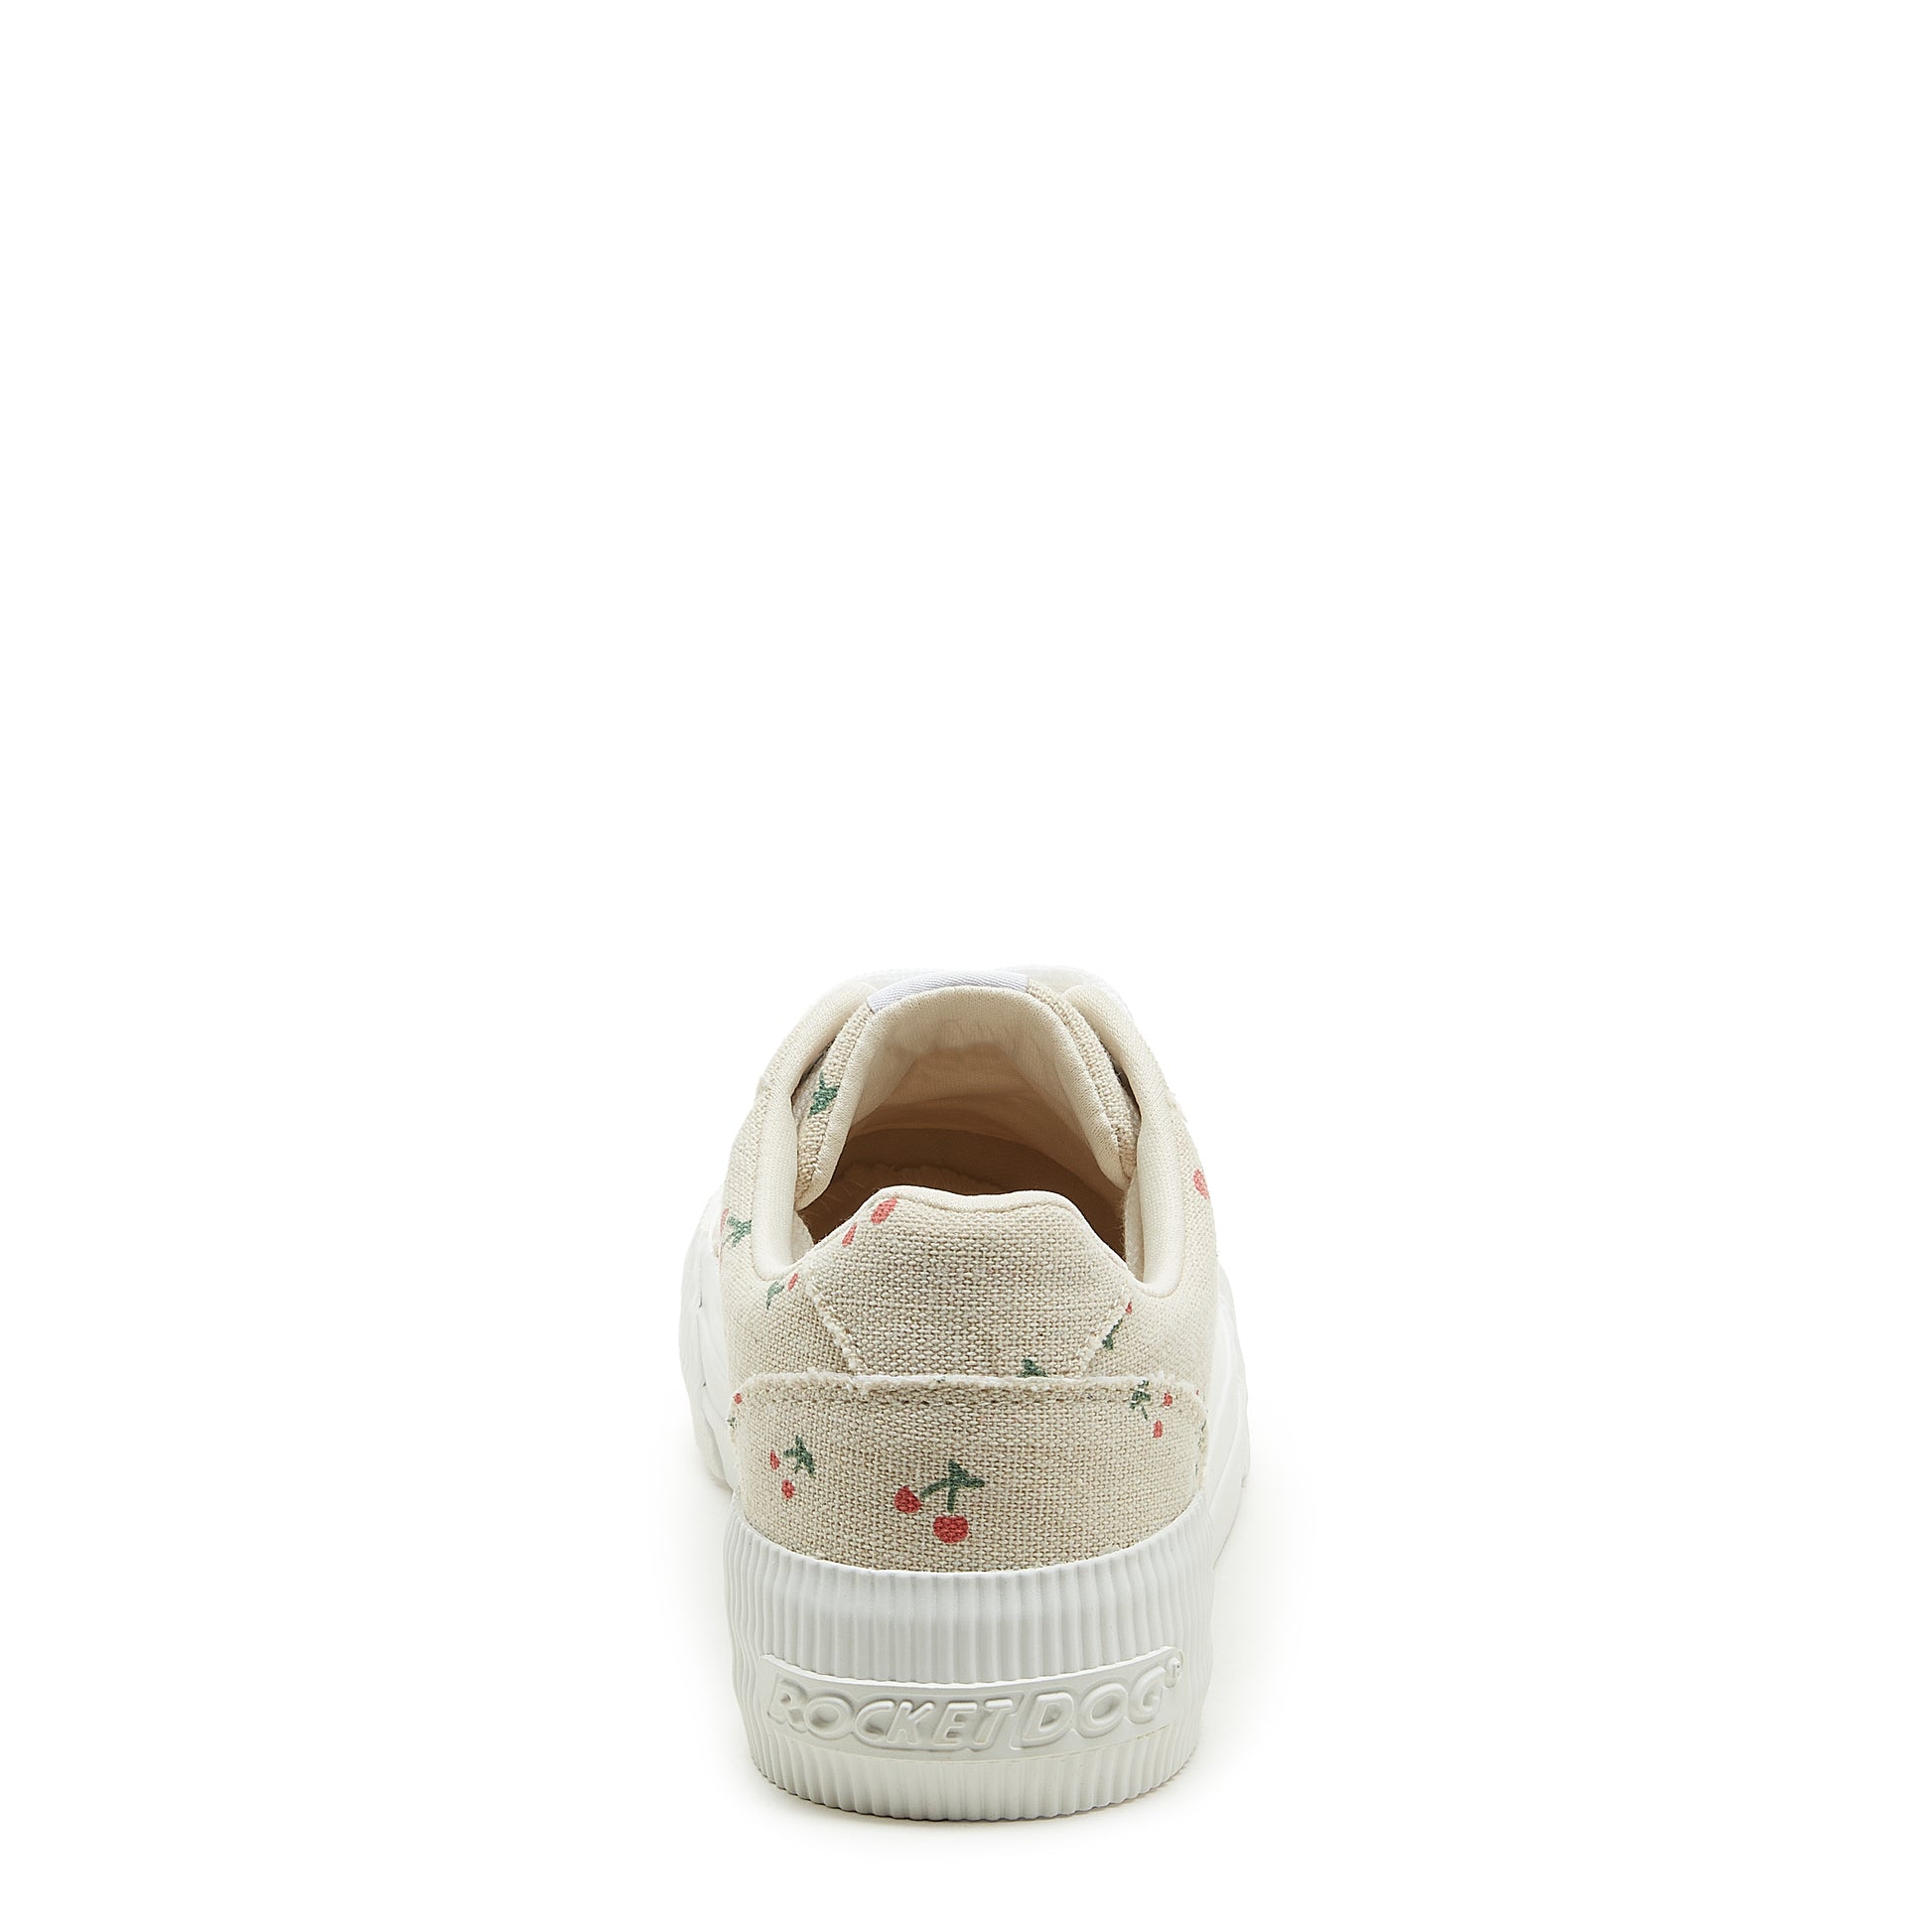 Rocket Dog® Cheery Recycled Cotton Cherry Print Sneaker